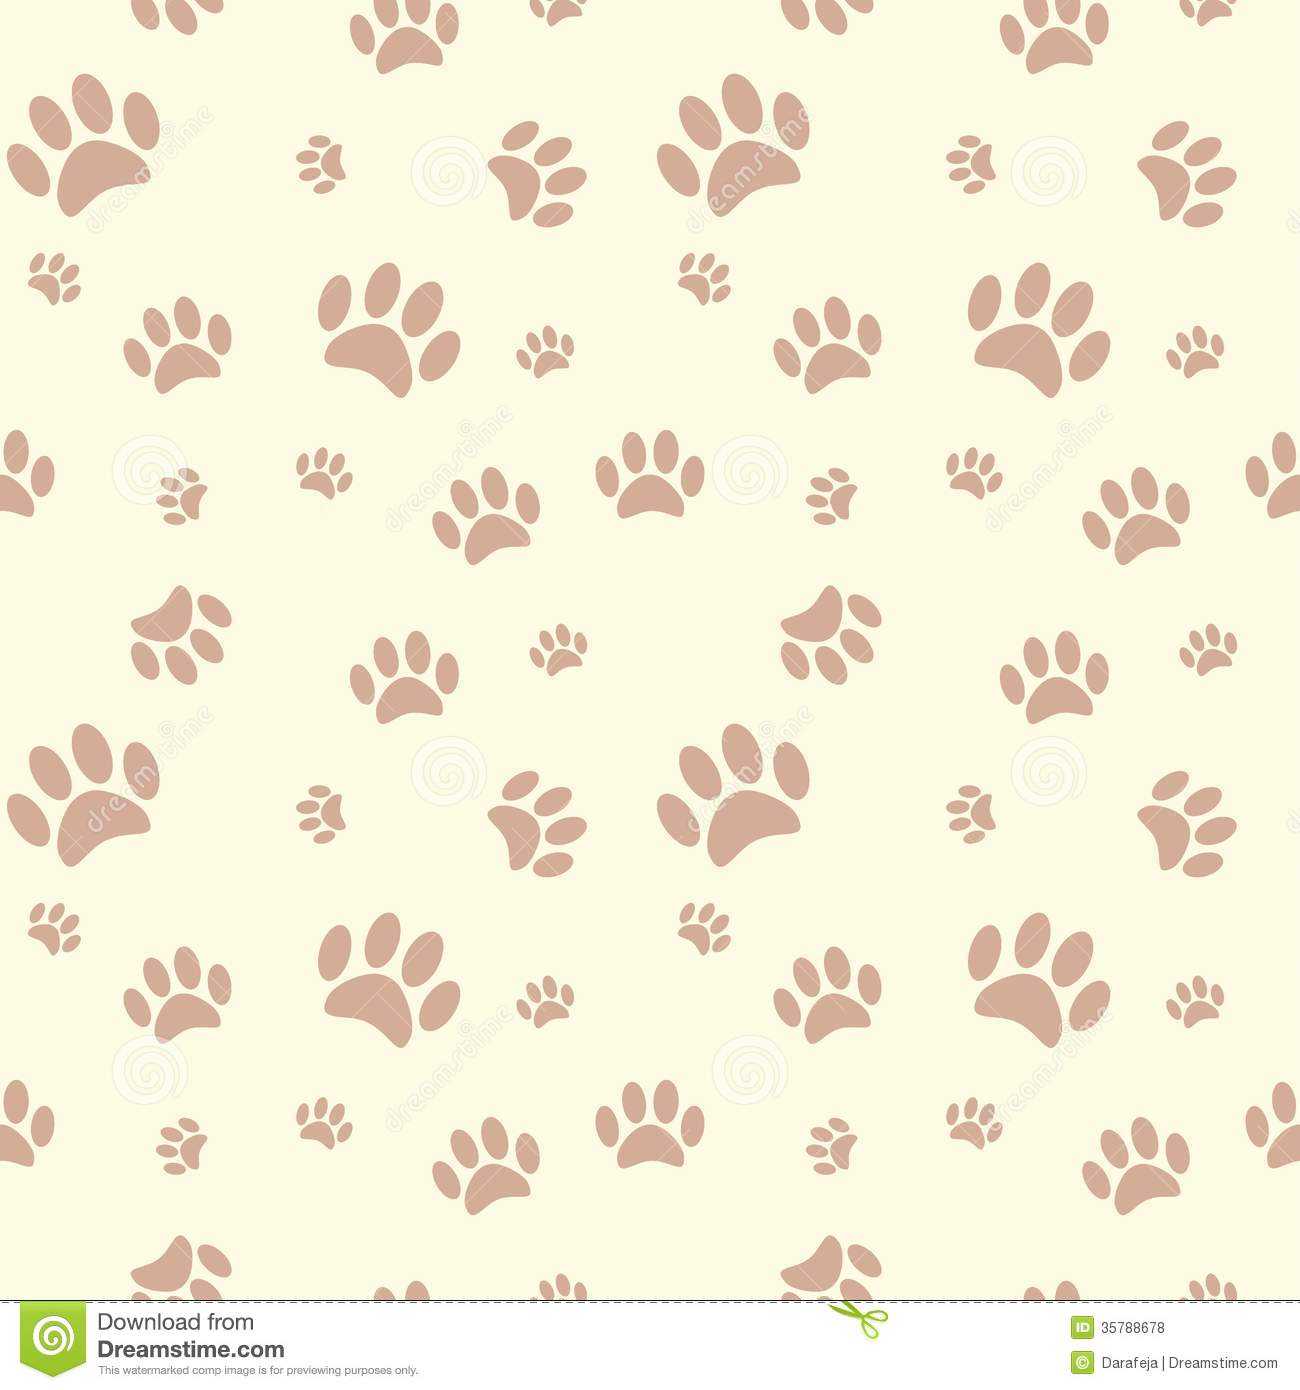 Wallpaper Paw Prints Background Royalty Stock Photo Pictures